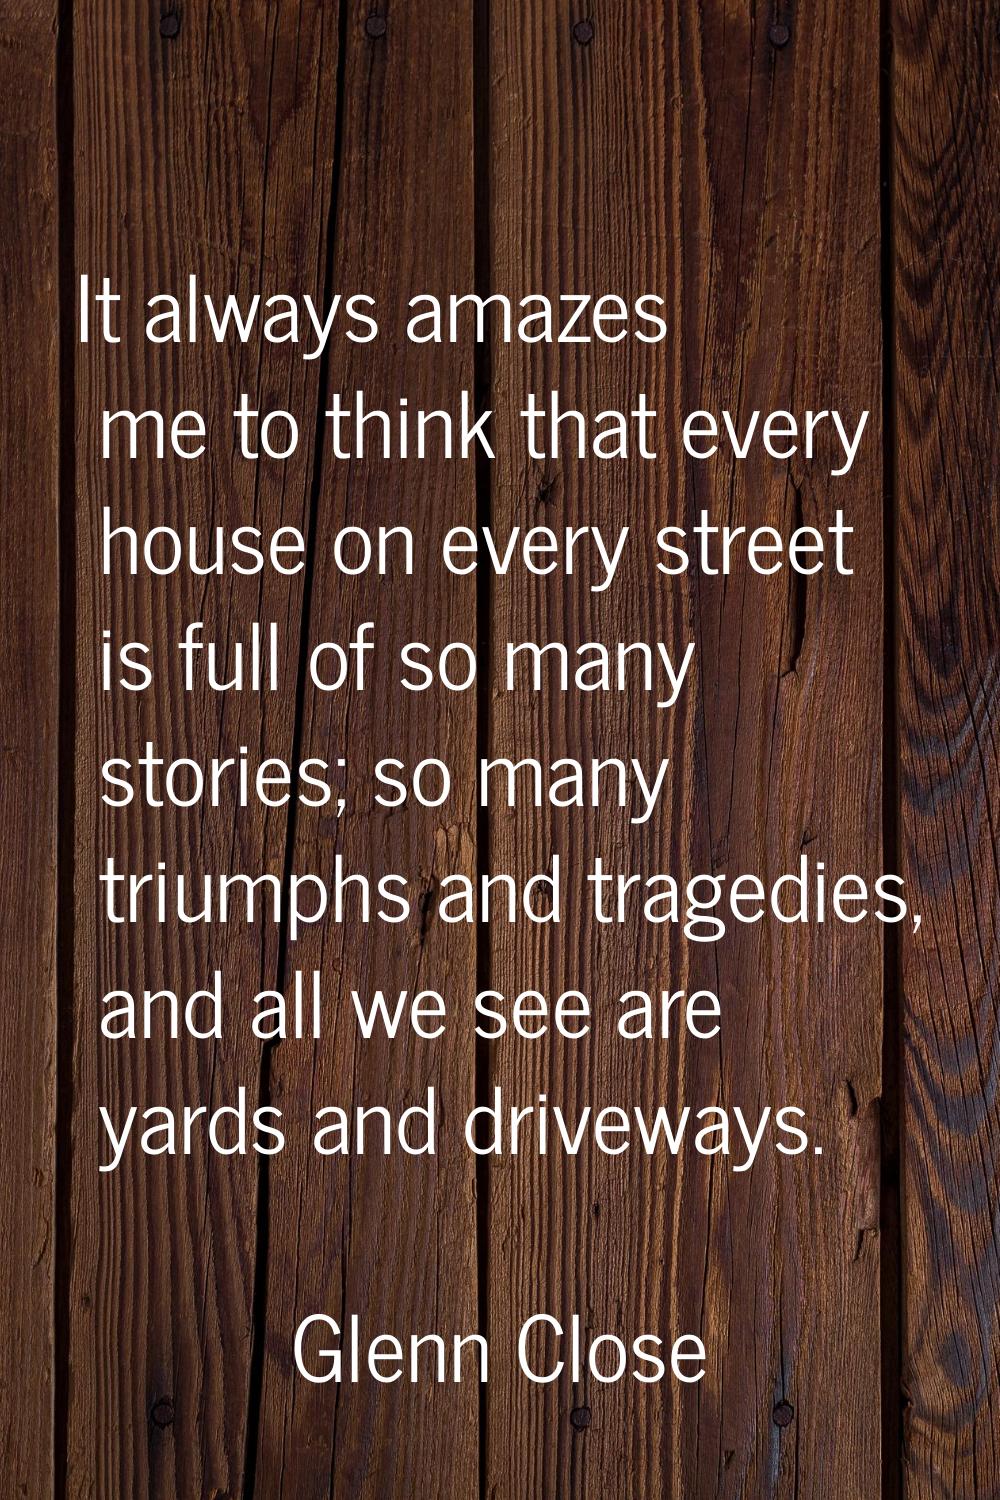 It always amazes me to think that every house on every street is full of so many stories; so many t